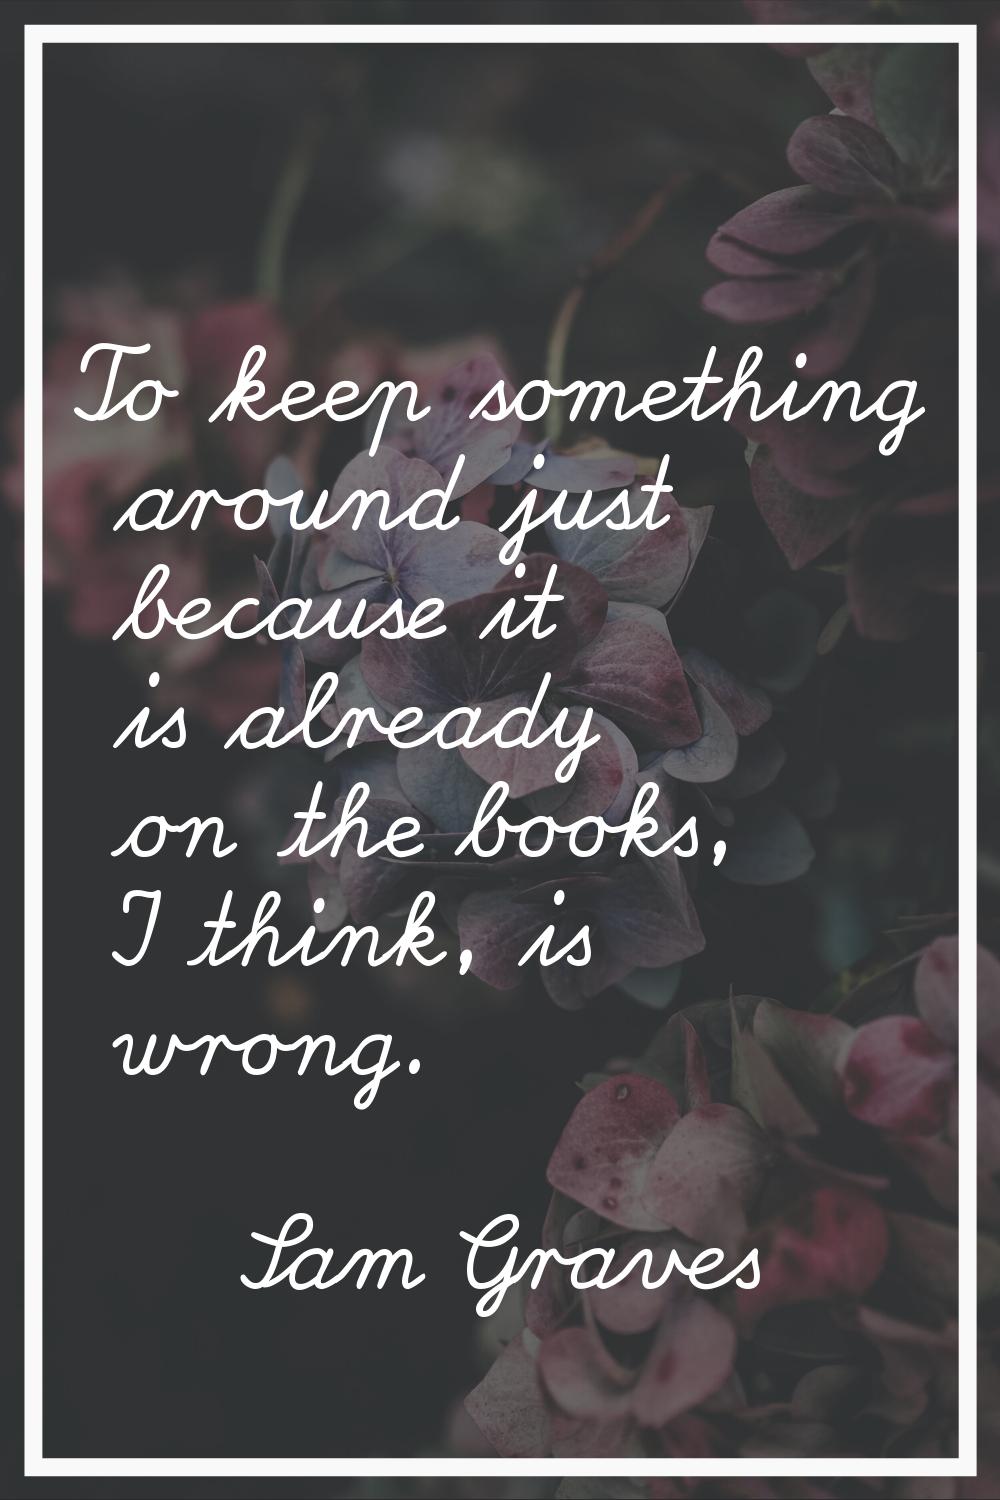 To keep something around just because it is already on the books, I think, is wrong.